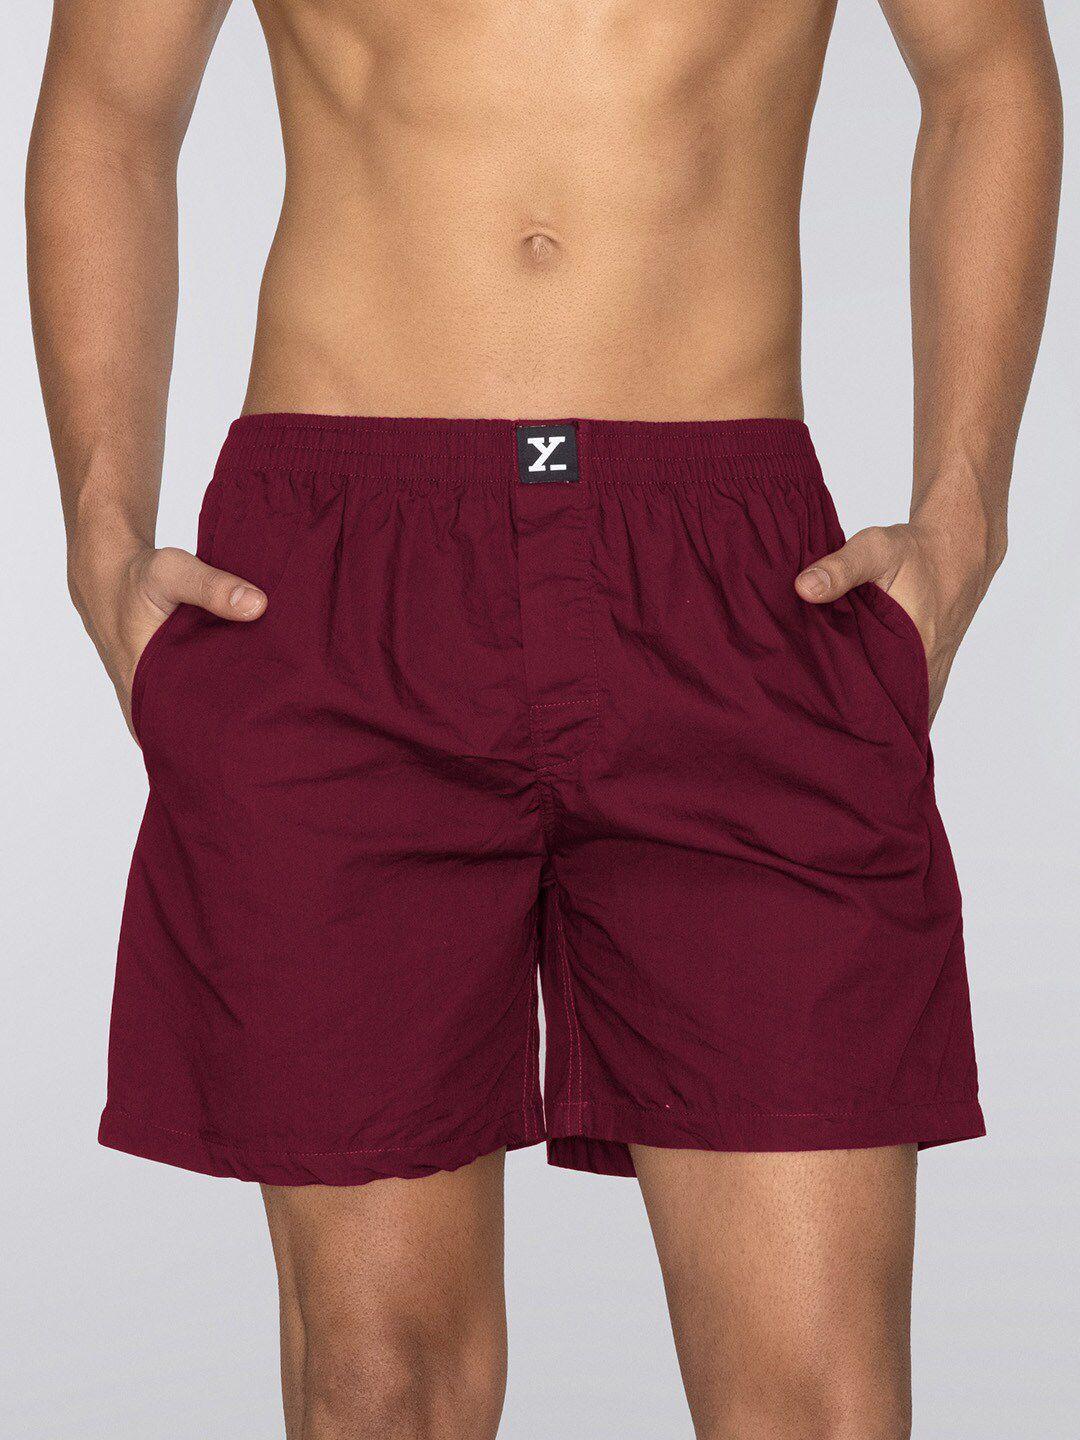 xyxx-mid-rise-combed-cotton-boxers